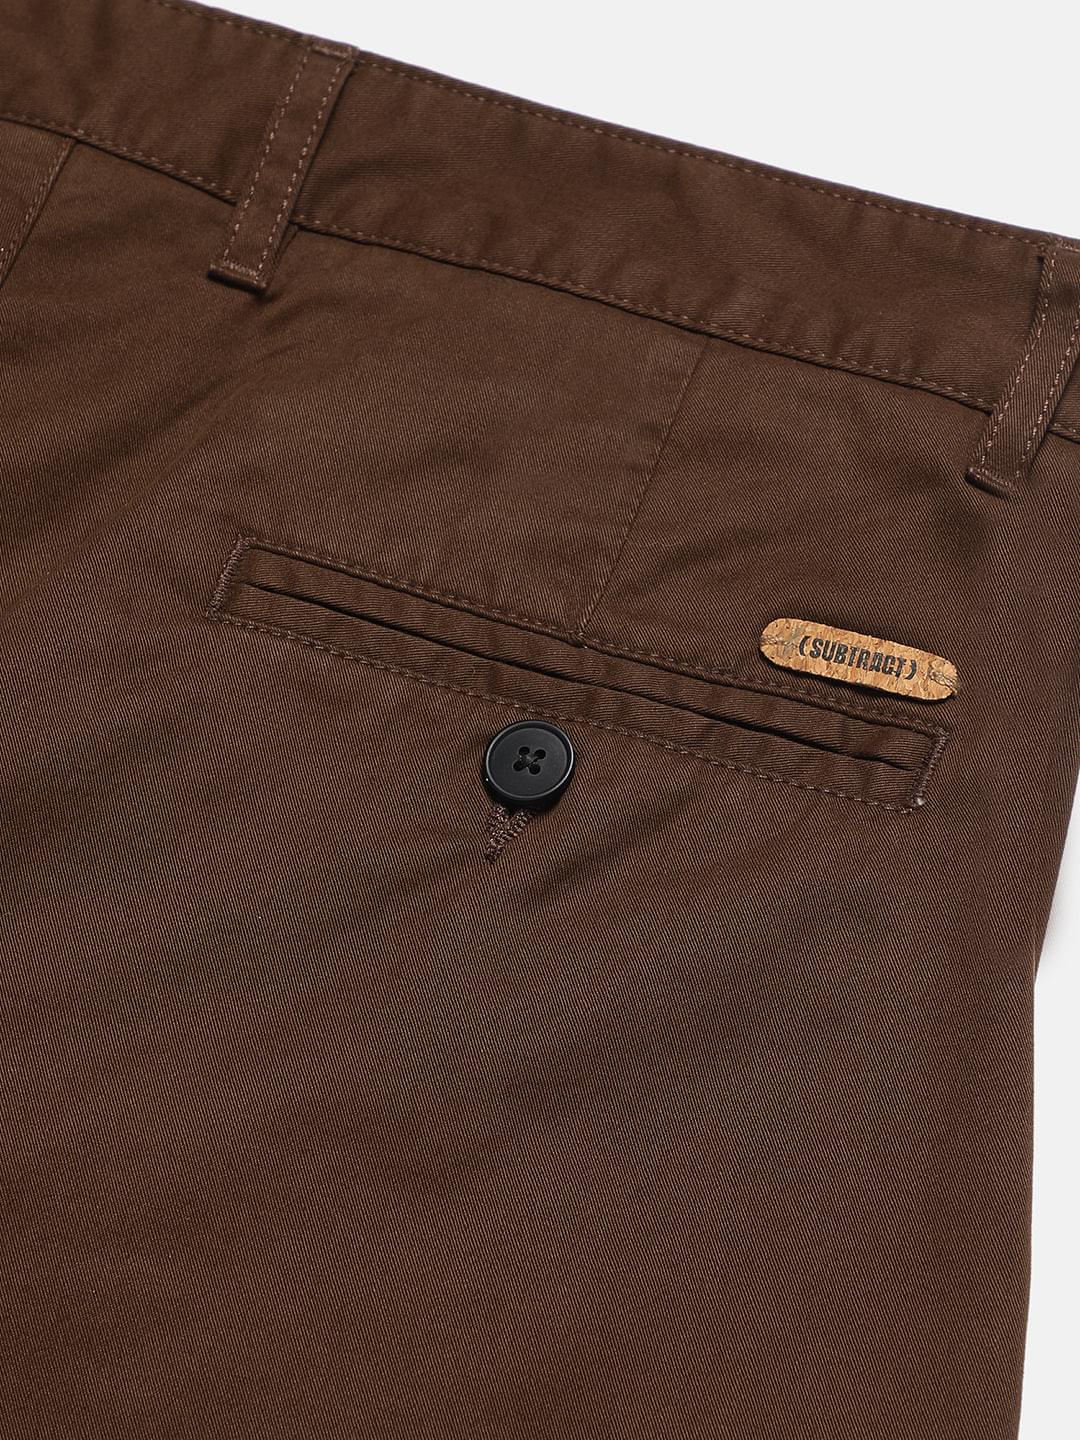 2 Way Stretch Pleated Chinos in Chocolate Brown- Comfort Fit